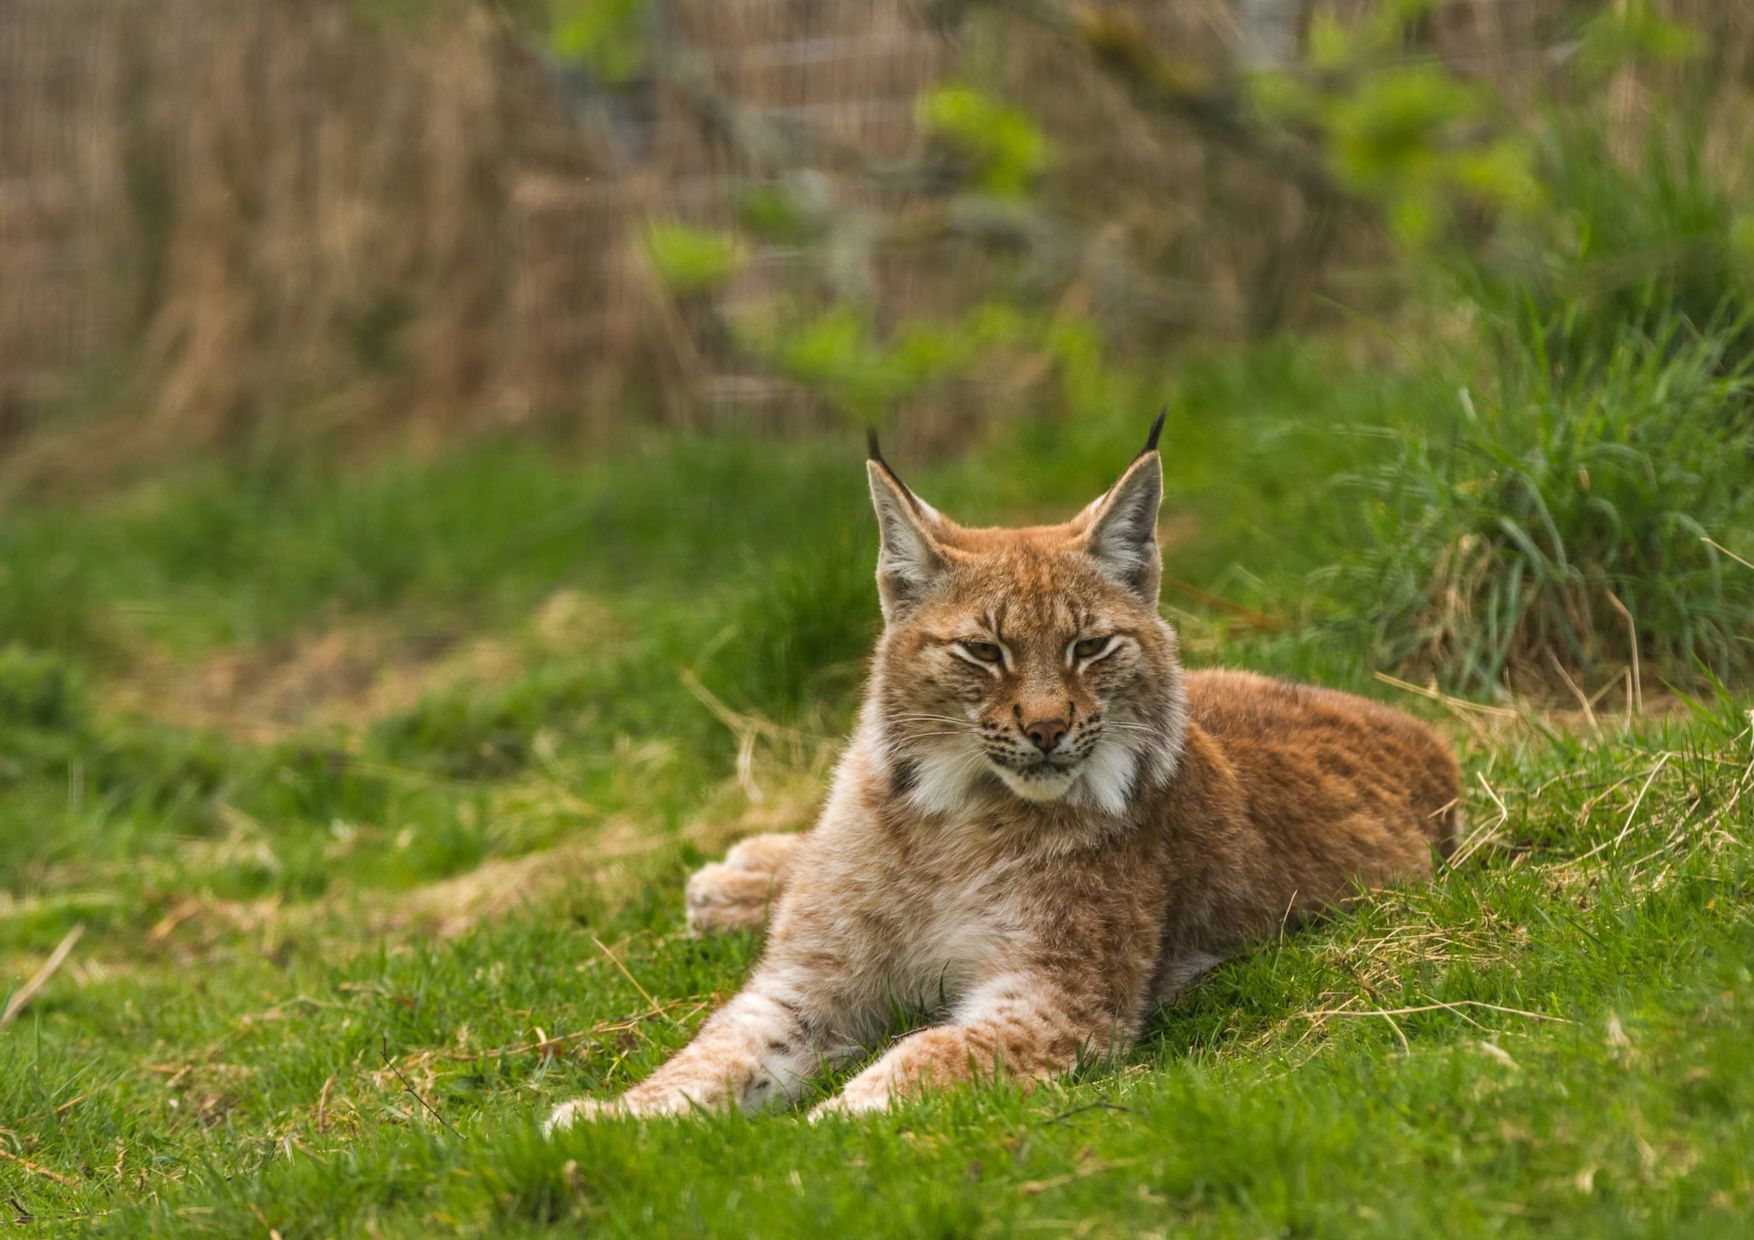 The reintroduction of the northern lynx to Scotland has been a topic of heated debate for decades. Photo: Getty